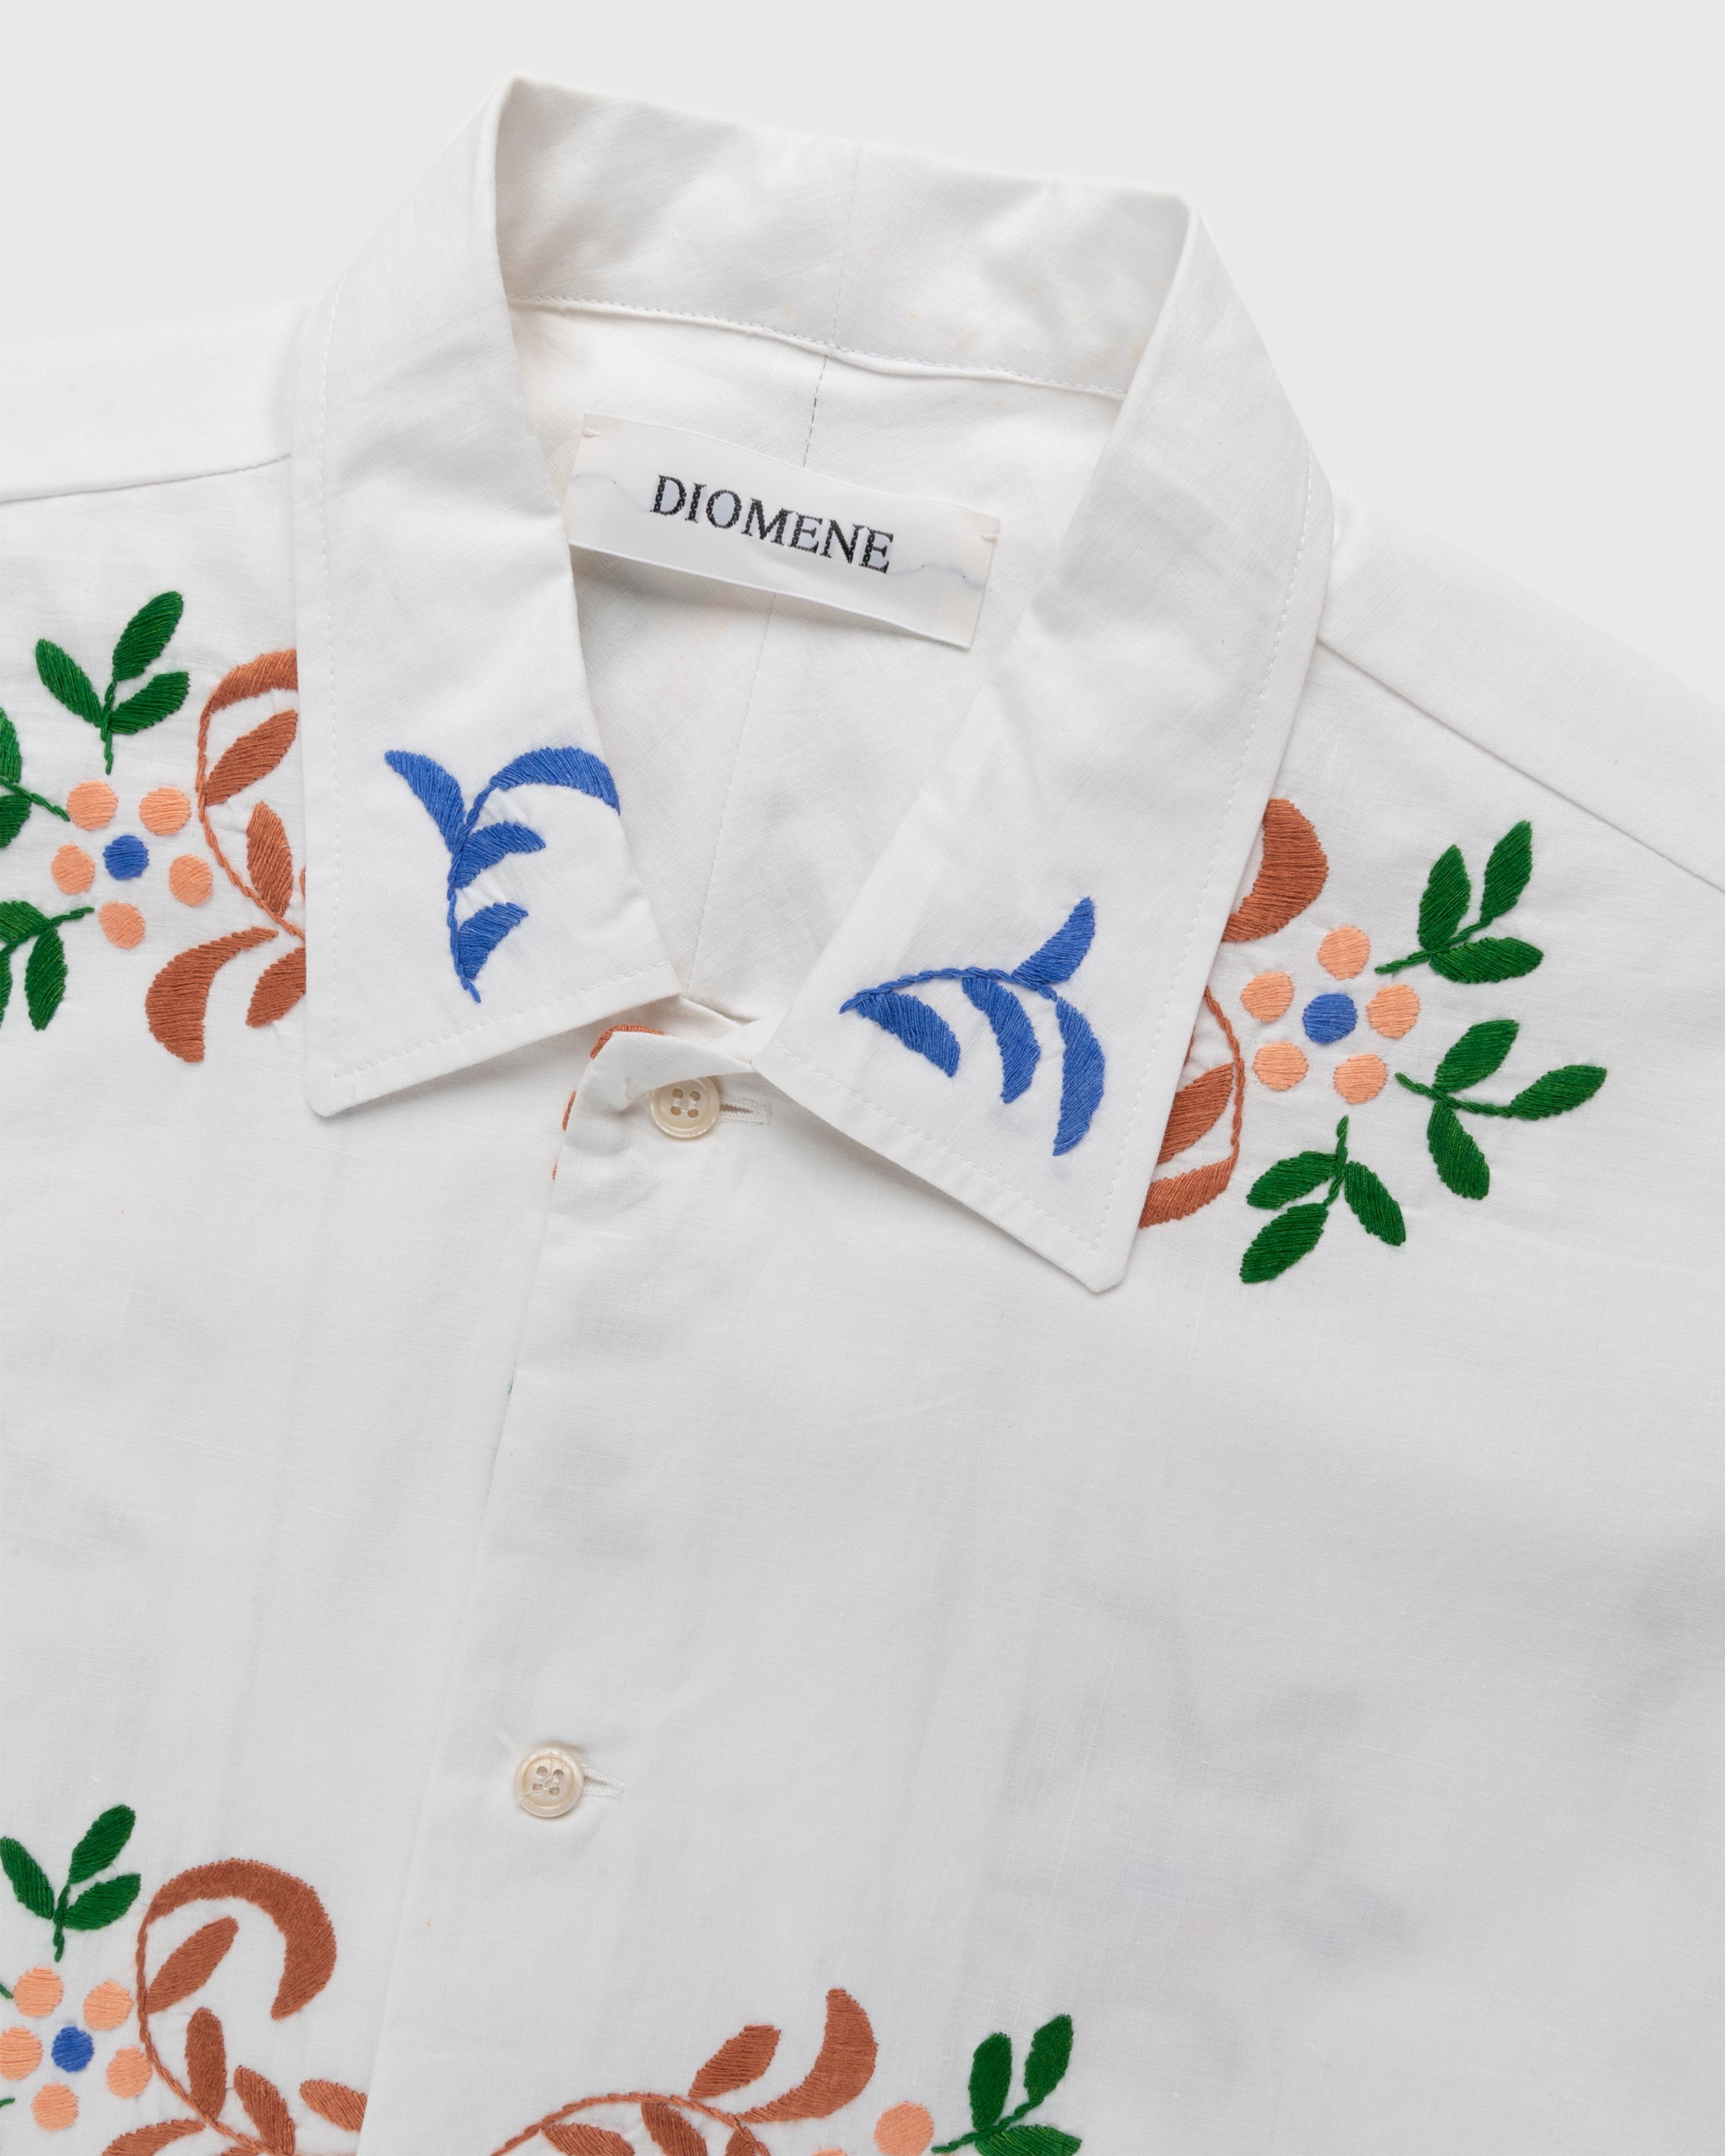 Diomene by Damir Doma - Embroidered Vacation Shirt White/Blue - Clothing - White - Image 4